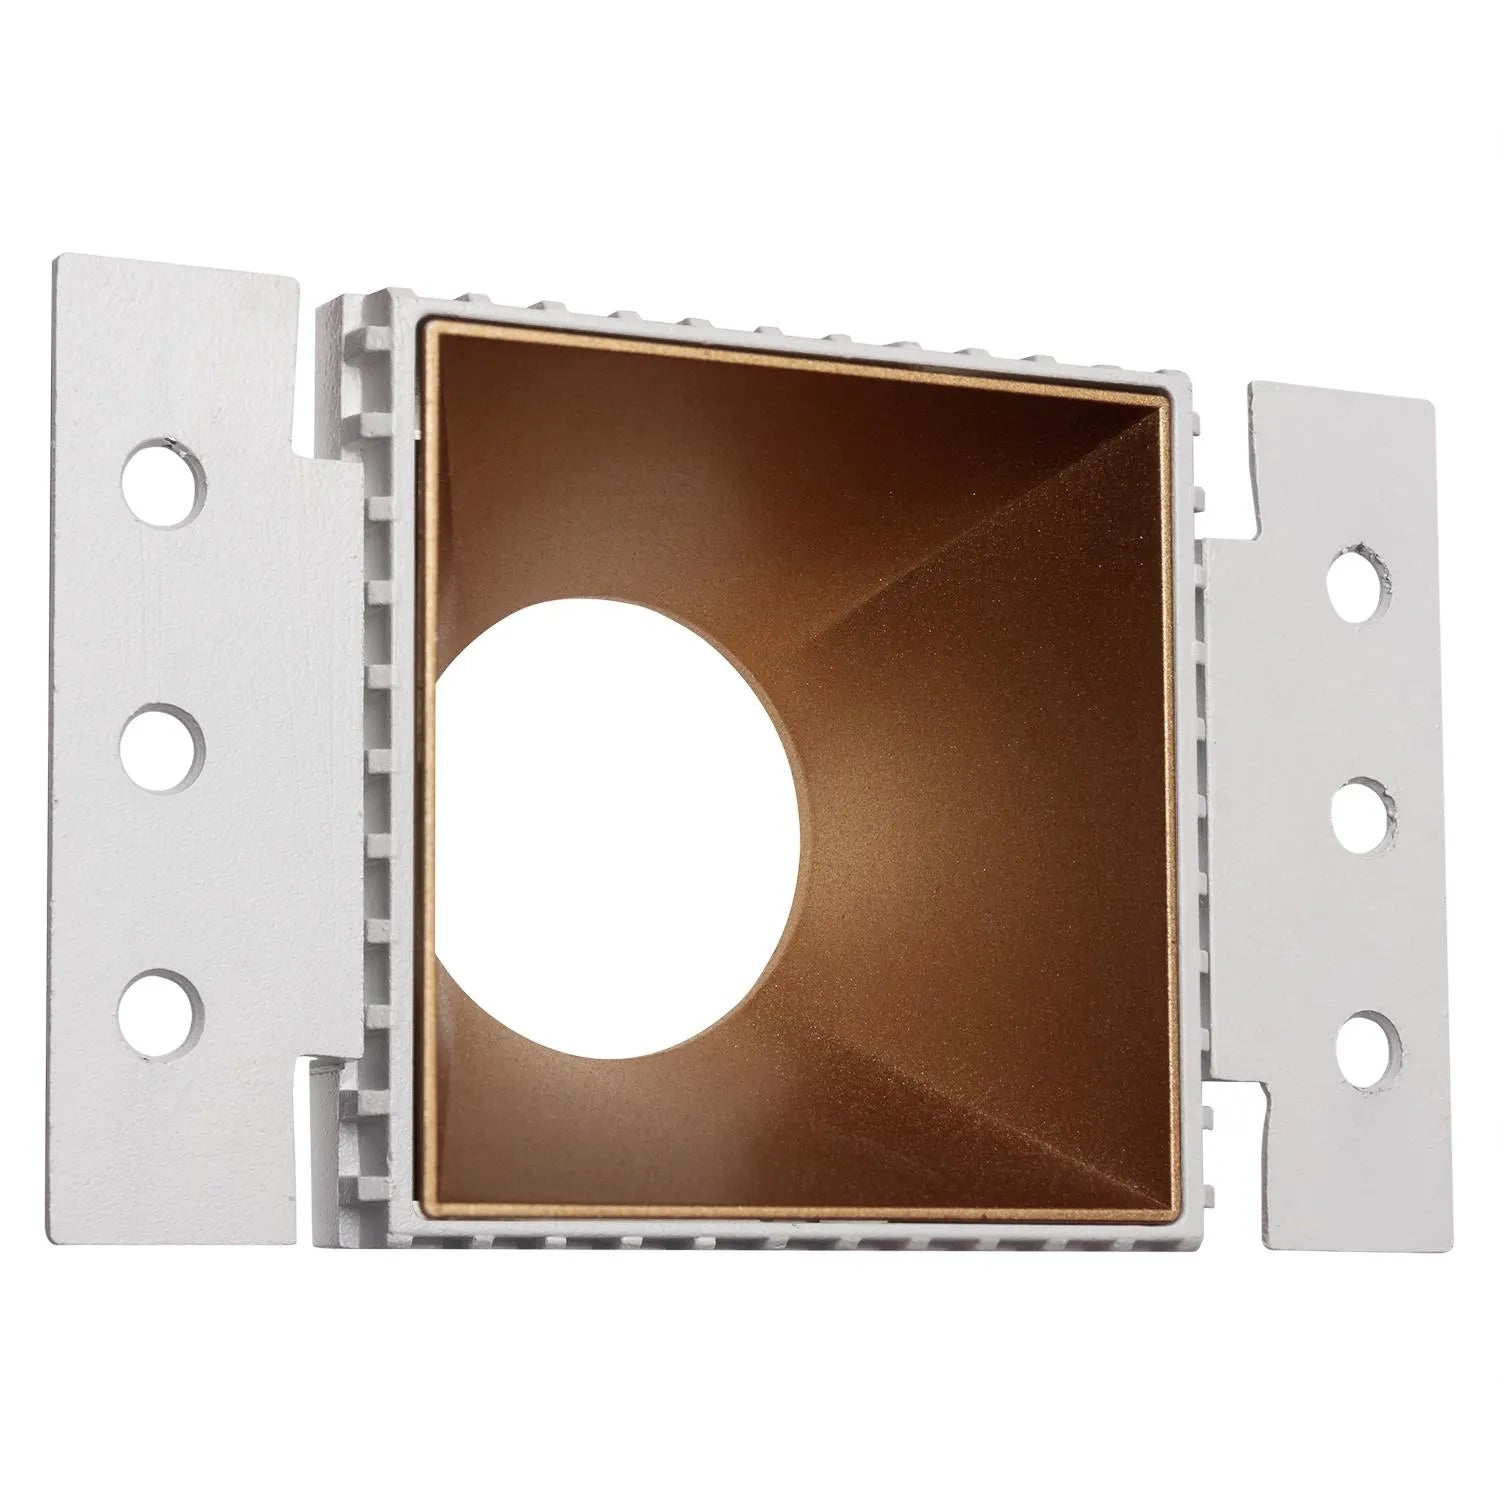 Westgate LRD-TL-10W-27K-4S-MG LED 4" Round Architectural Trimless Recessed Light Residential Lighting - Matte Gold